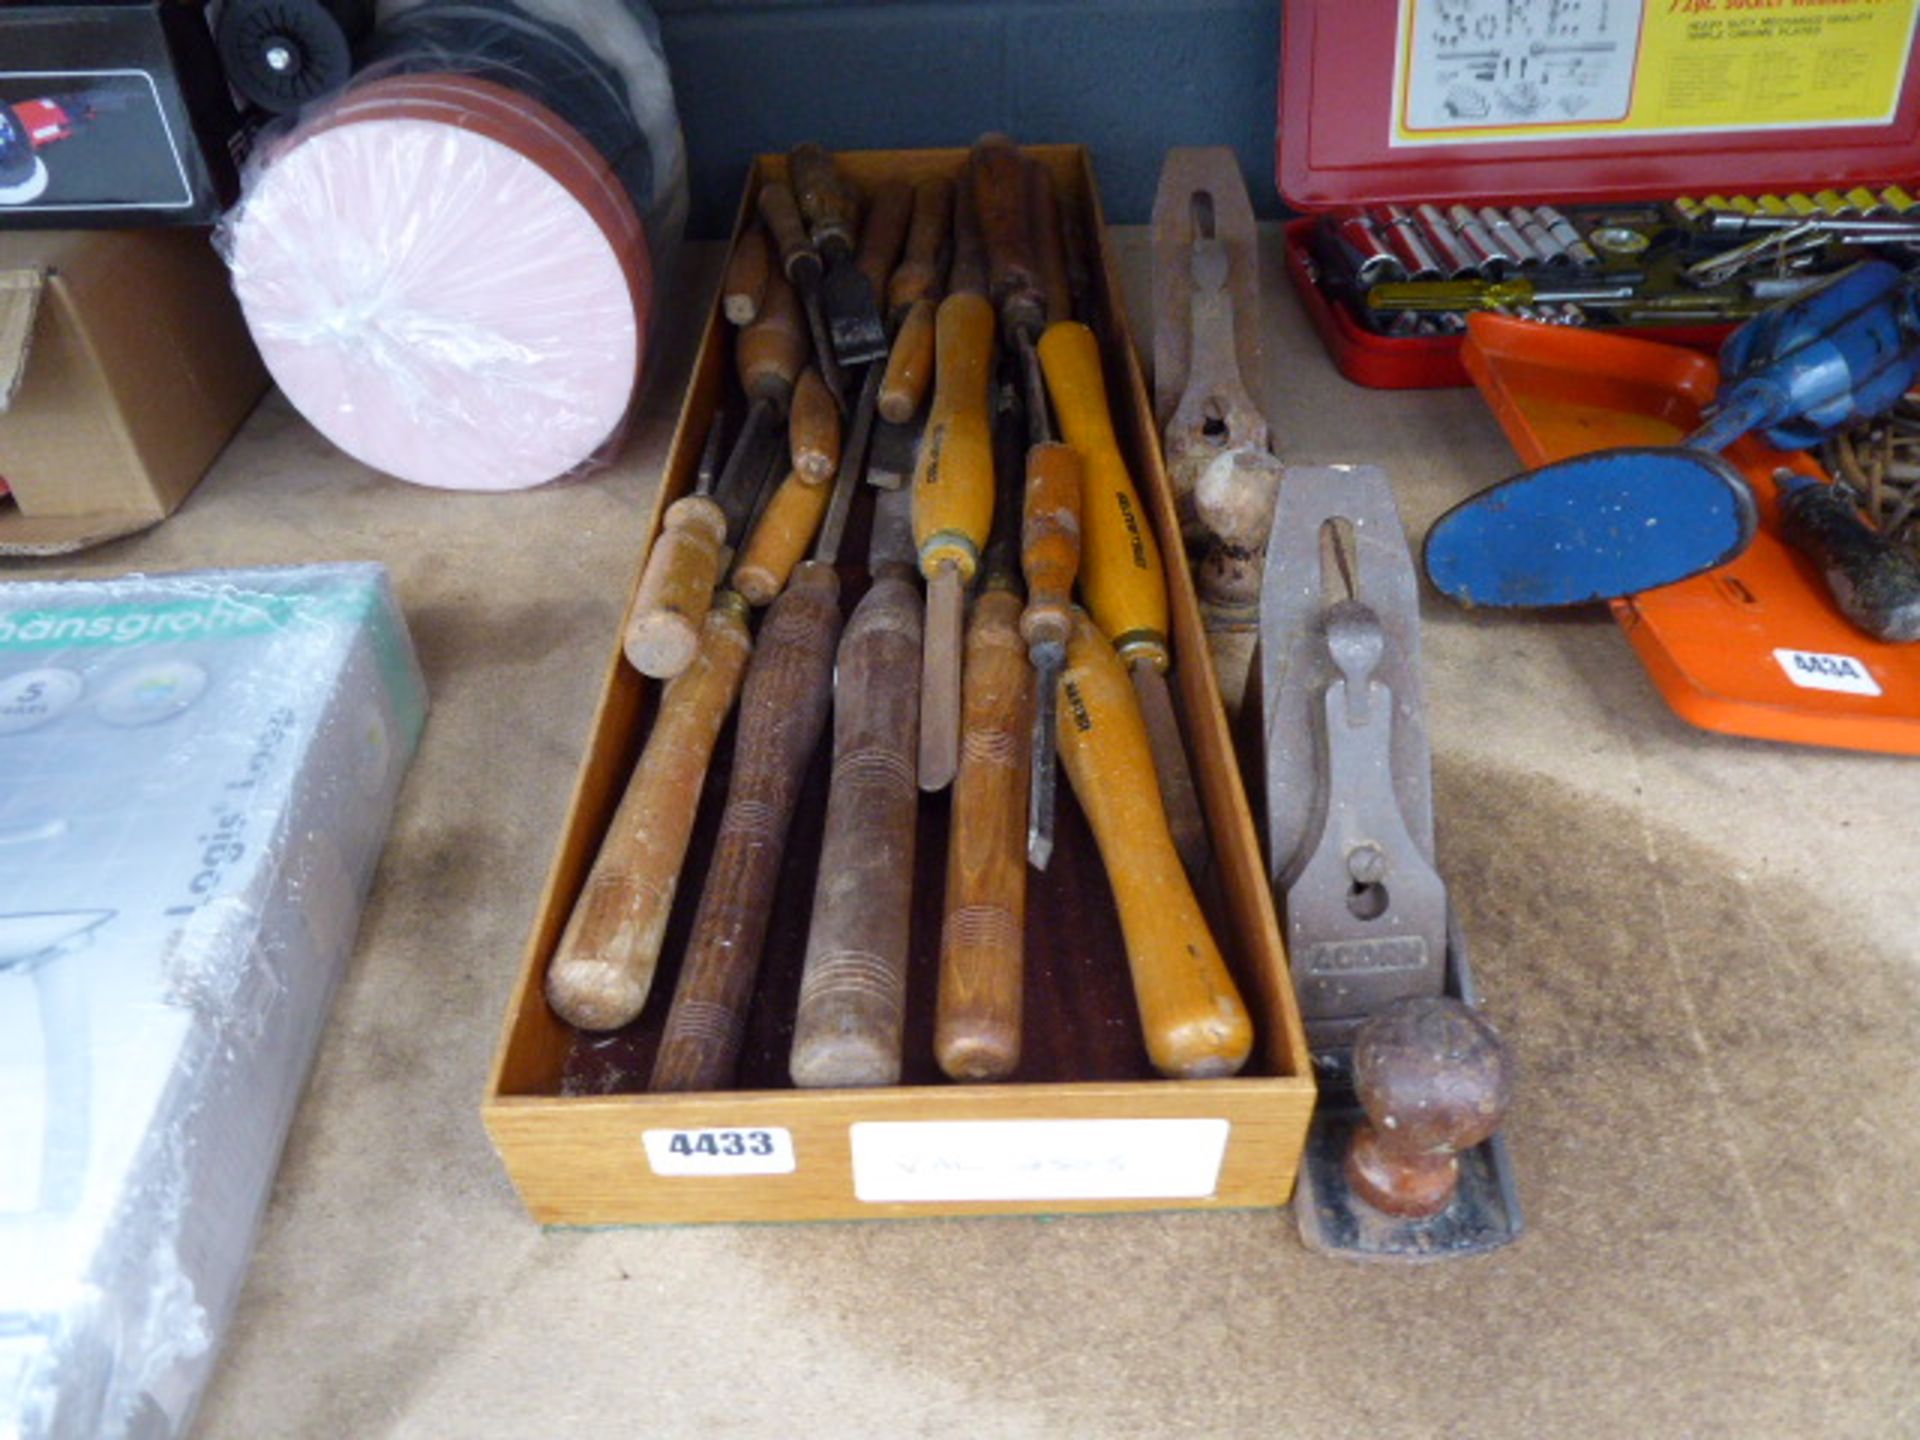 Box of wood turning chisels and 2 planes